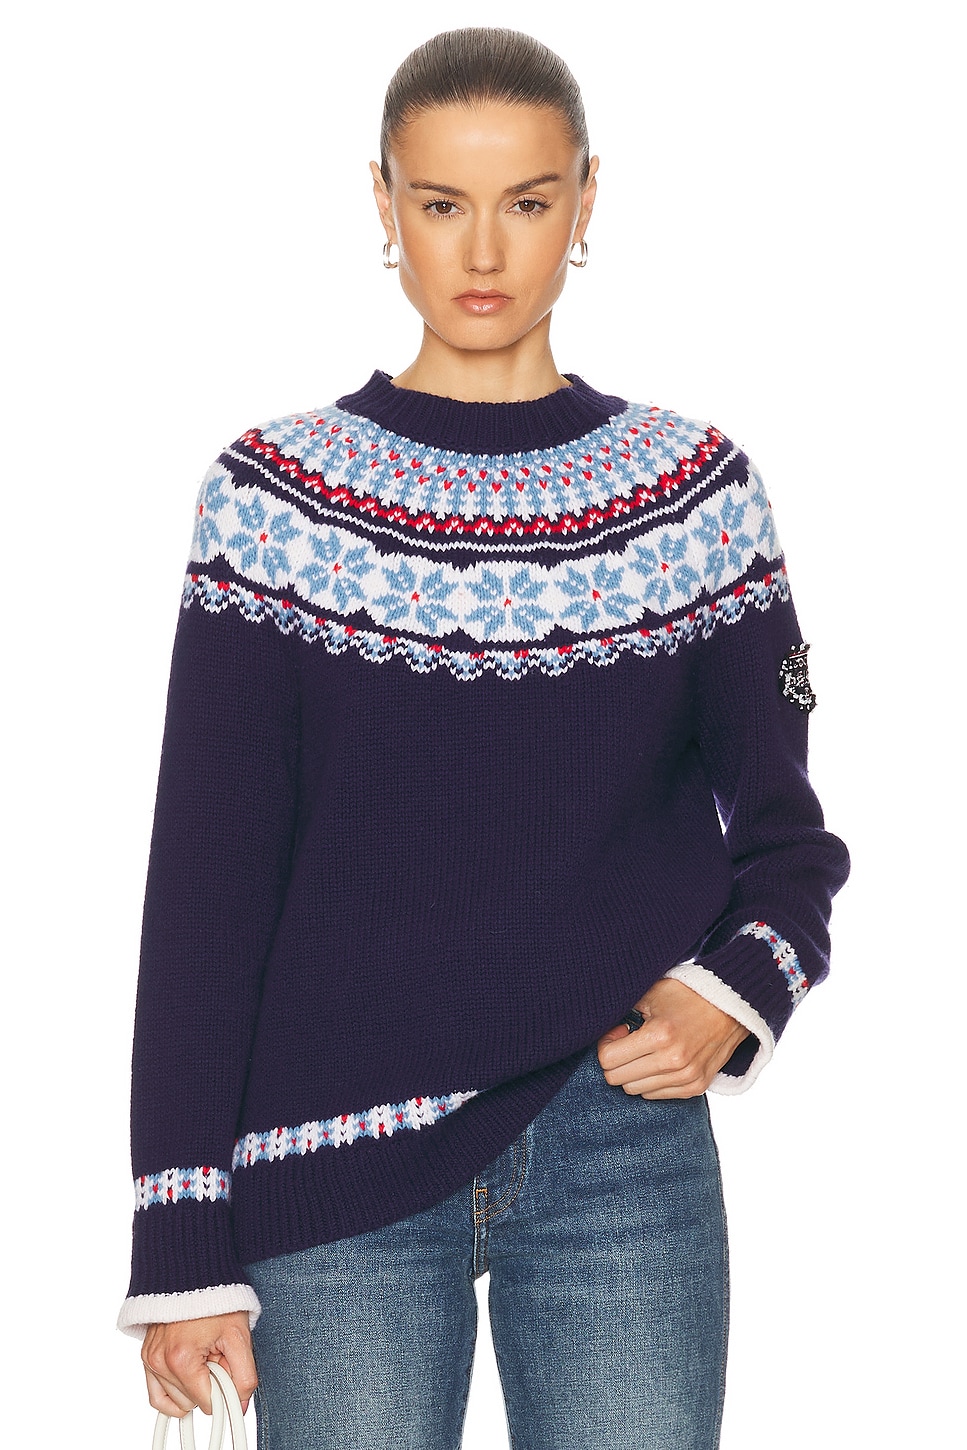 Image 1 of FWRD Renew Chanel Nordic Print Sweater in Navy